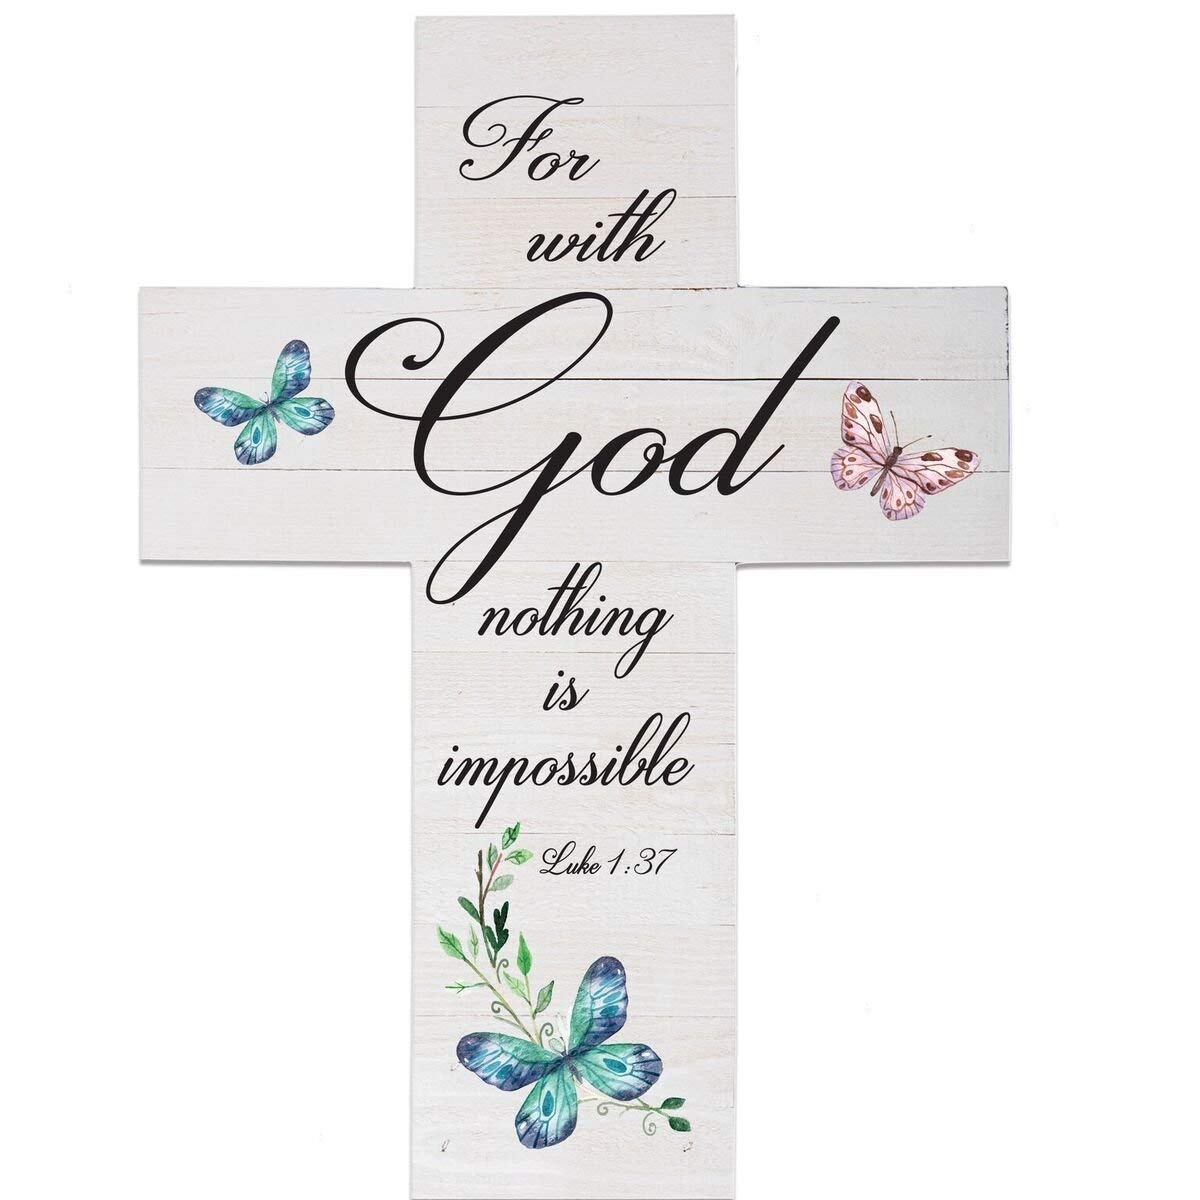 Inspirational Wooden Wall Cross Home Decor Lifesong Milestones Wall Plaque: Inspiring Home Decor with Bible Verse